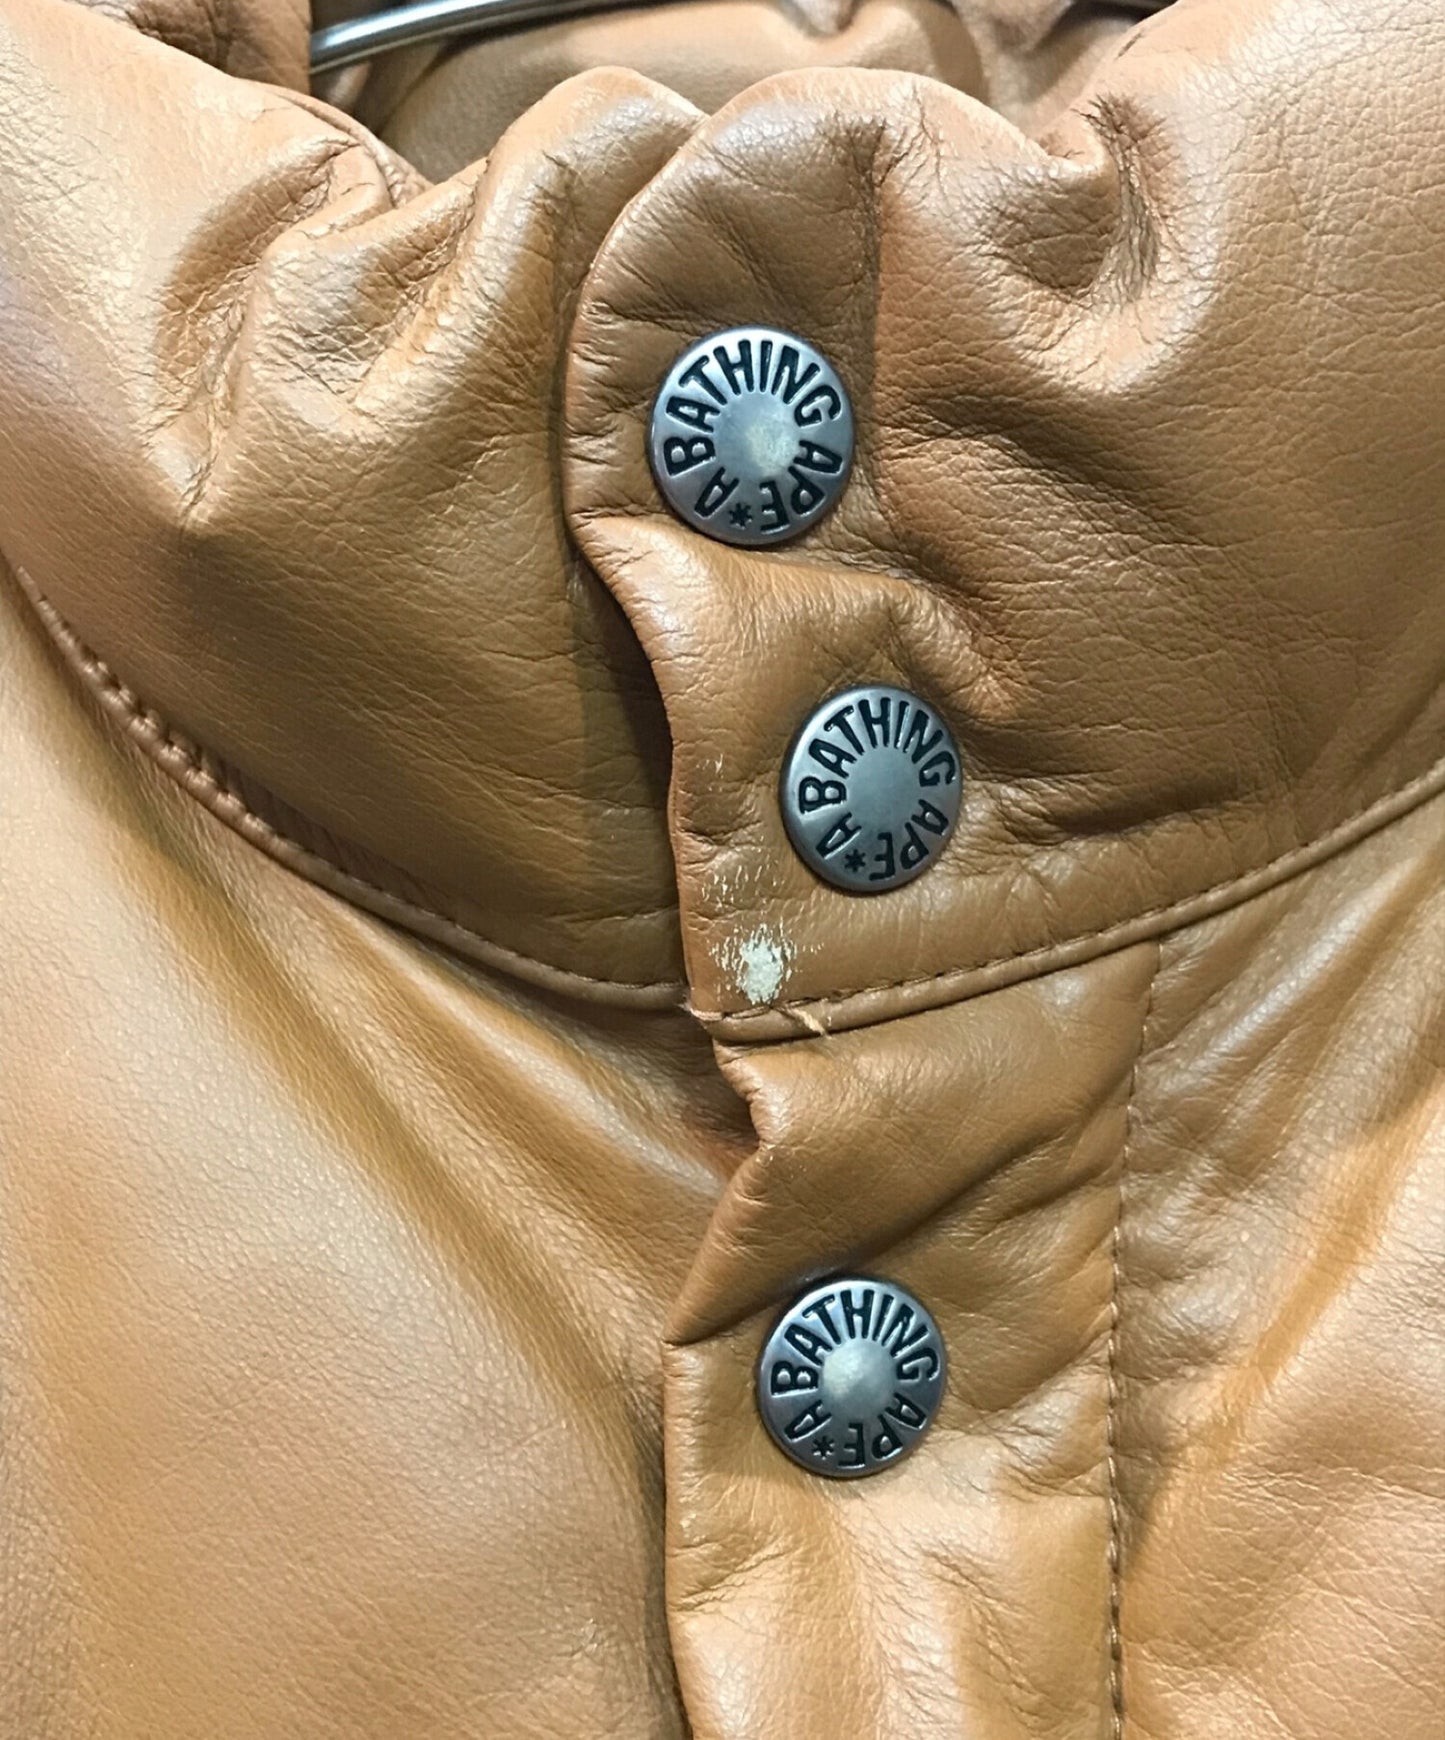 [Pre-owned] A BATHING APE Cow Leather Down Jacket